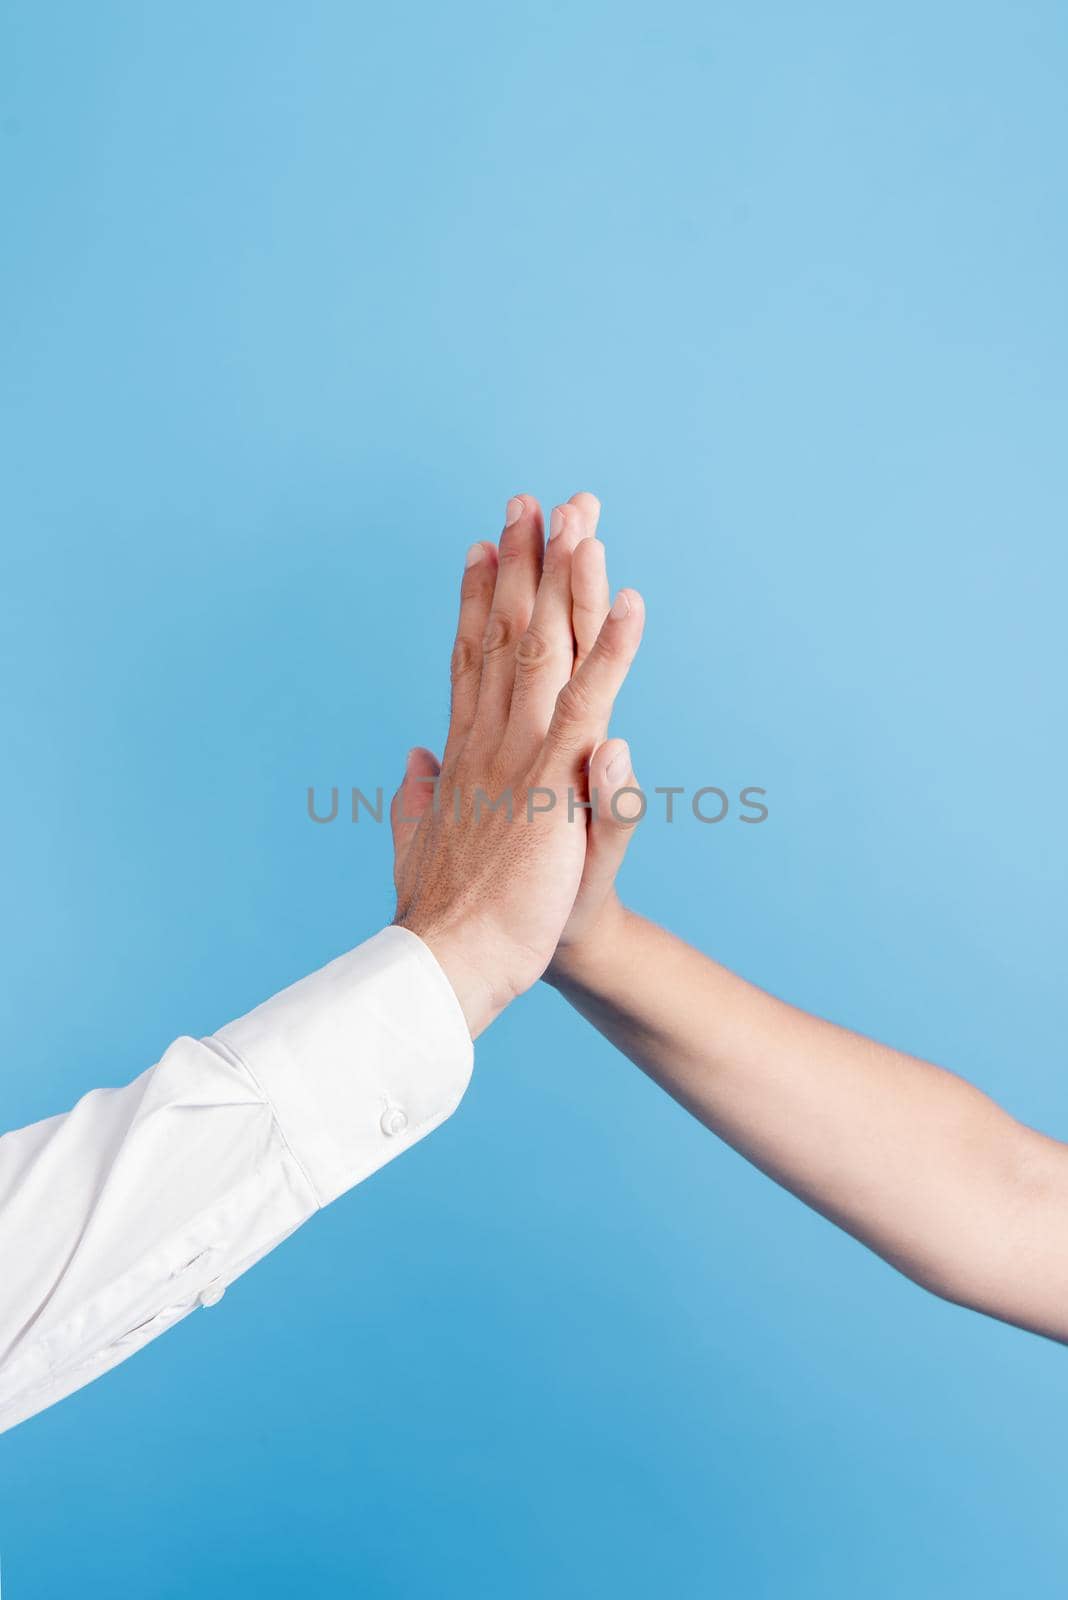 father daughter doing high five. Resolution and high quality beautiful photo